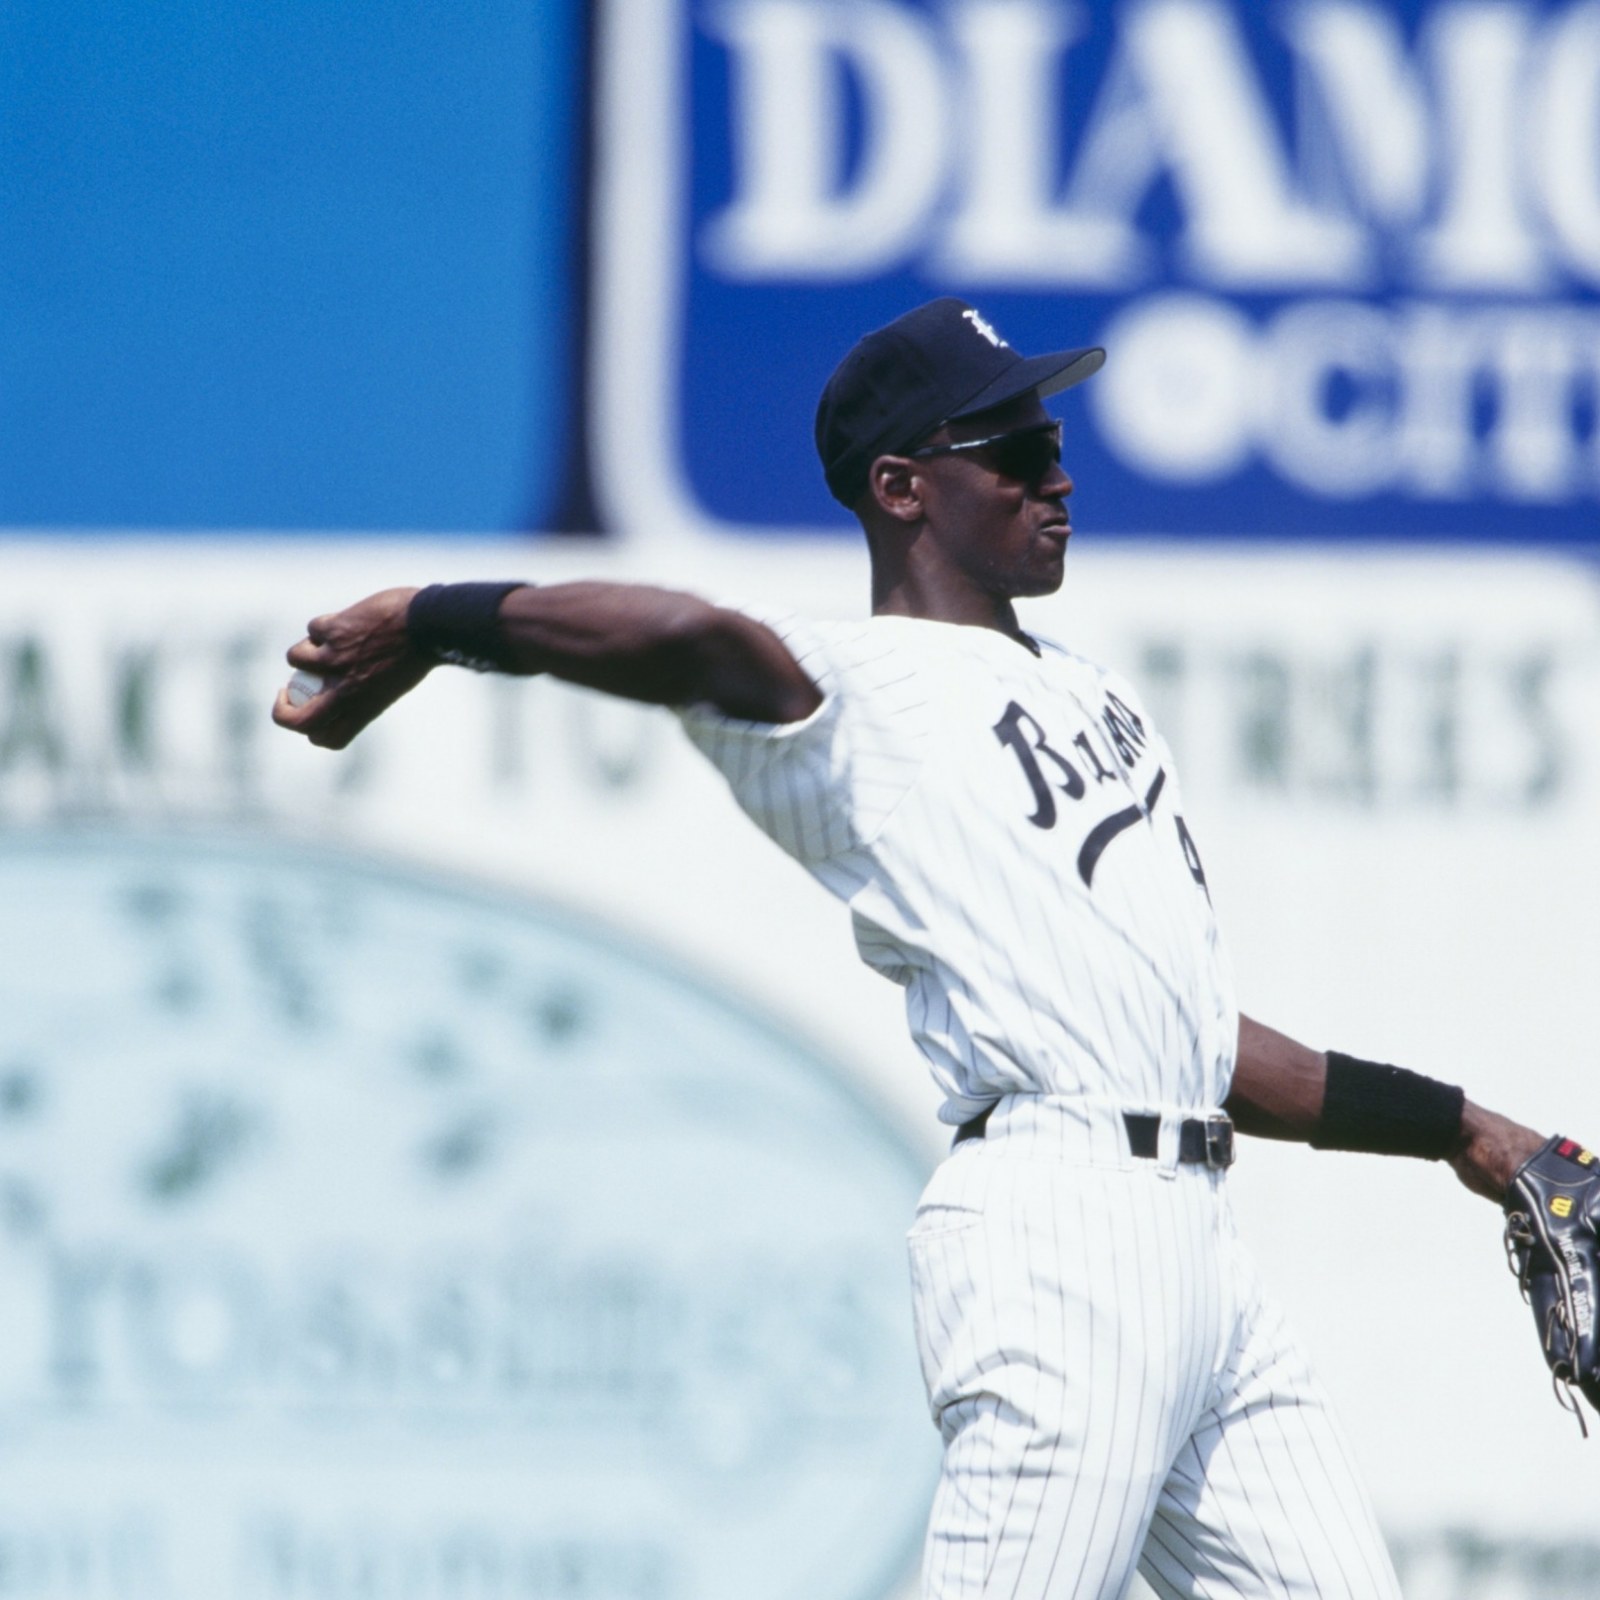 Michael Jordan Baseball Career and Highlights in NBA Star's Two Years Away From the Chicago